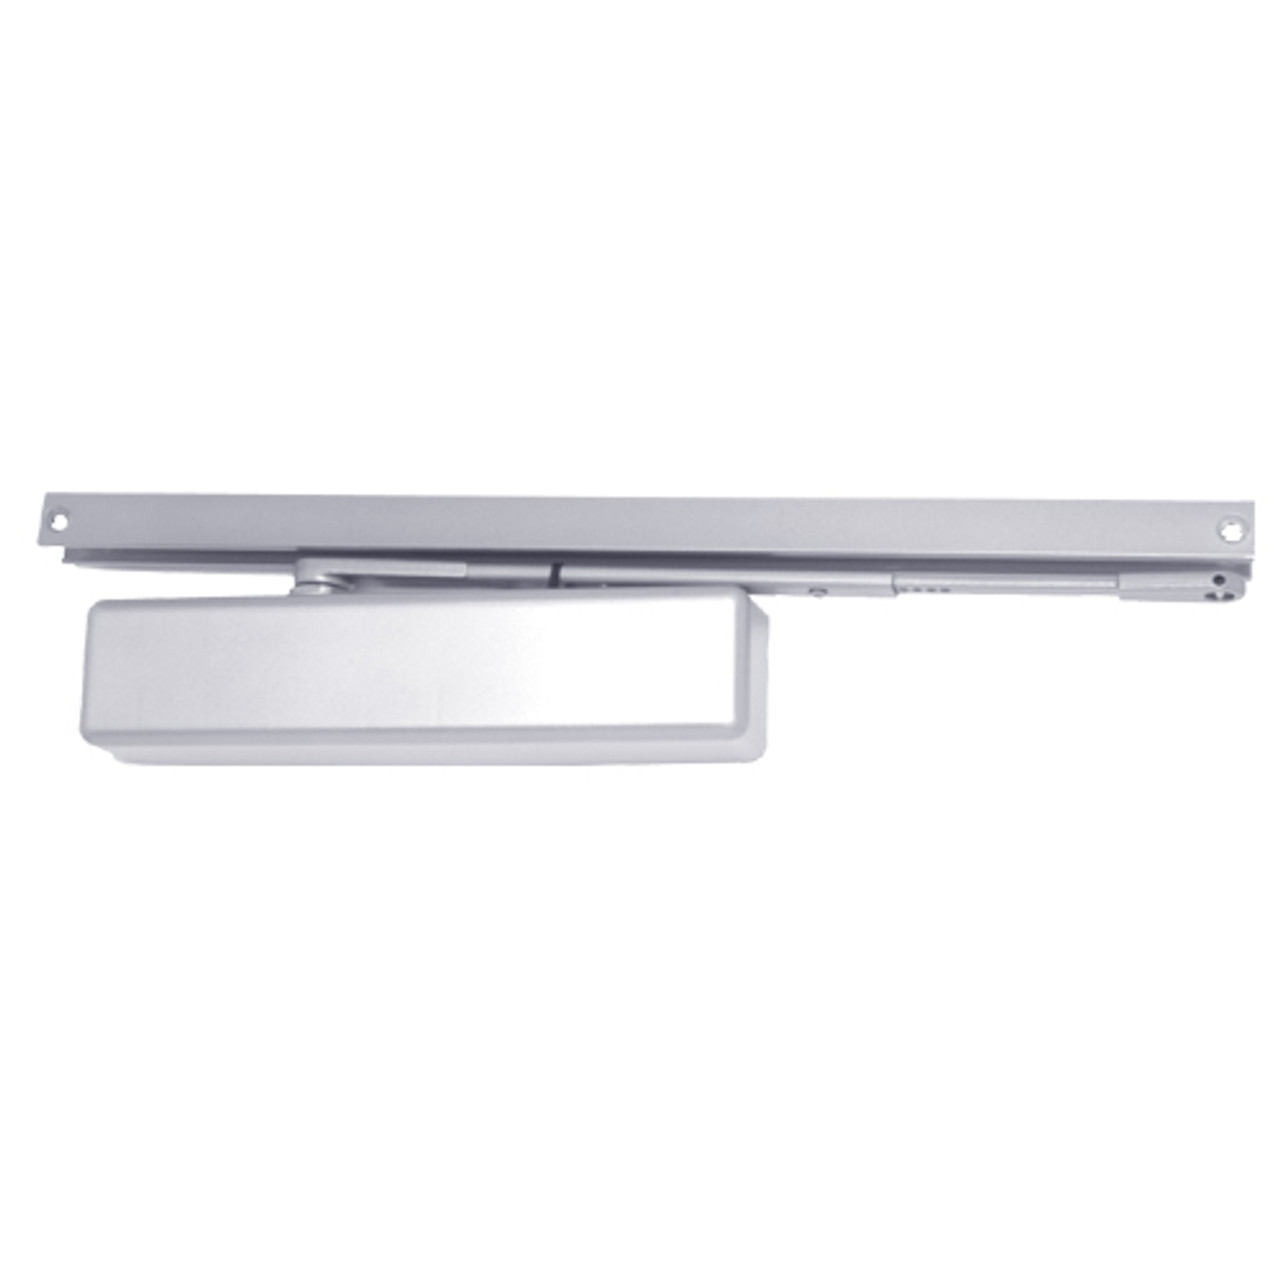 1460T-H-BUMPER-US26-FC LCN Surface Mount Door Closer with Hold Open Track with Bumper in Bright Chrome Finish